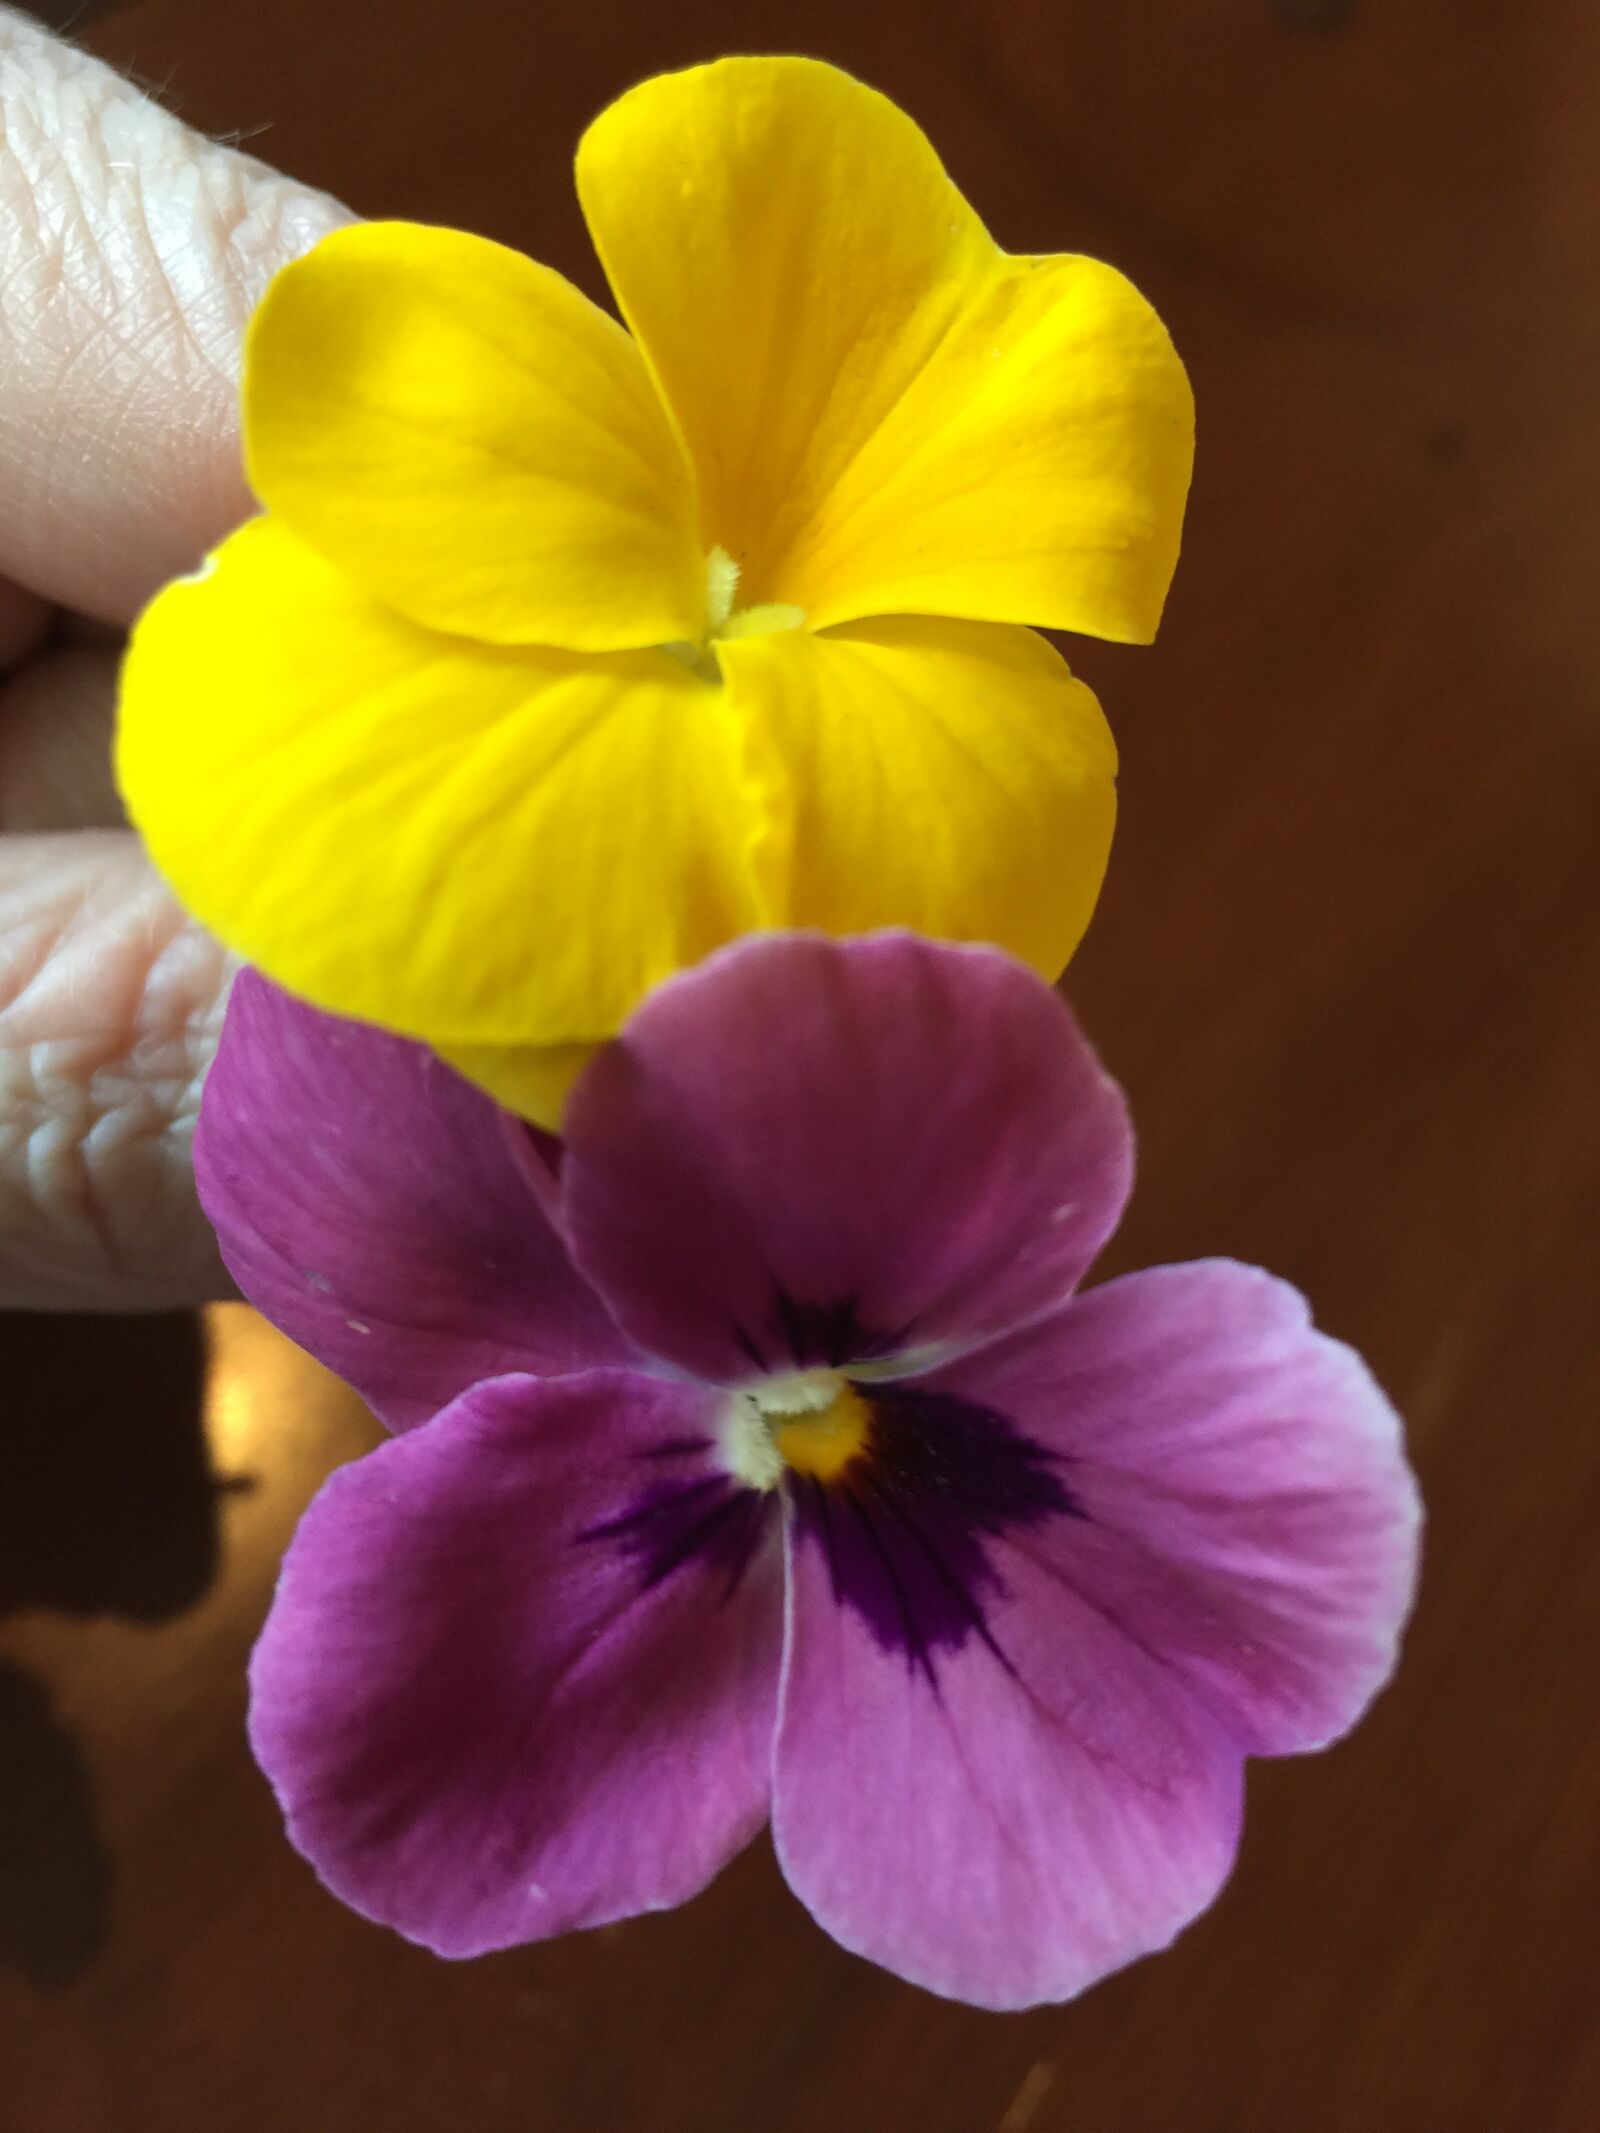 Apple iPhone 6 Plus + iPhone 6 Plus back camera 4.15mm f/2.2 sample photo. Small flowers, yellow, purple photography